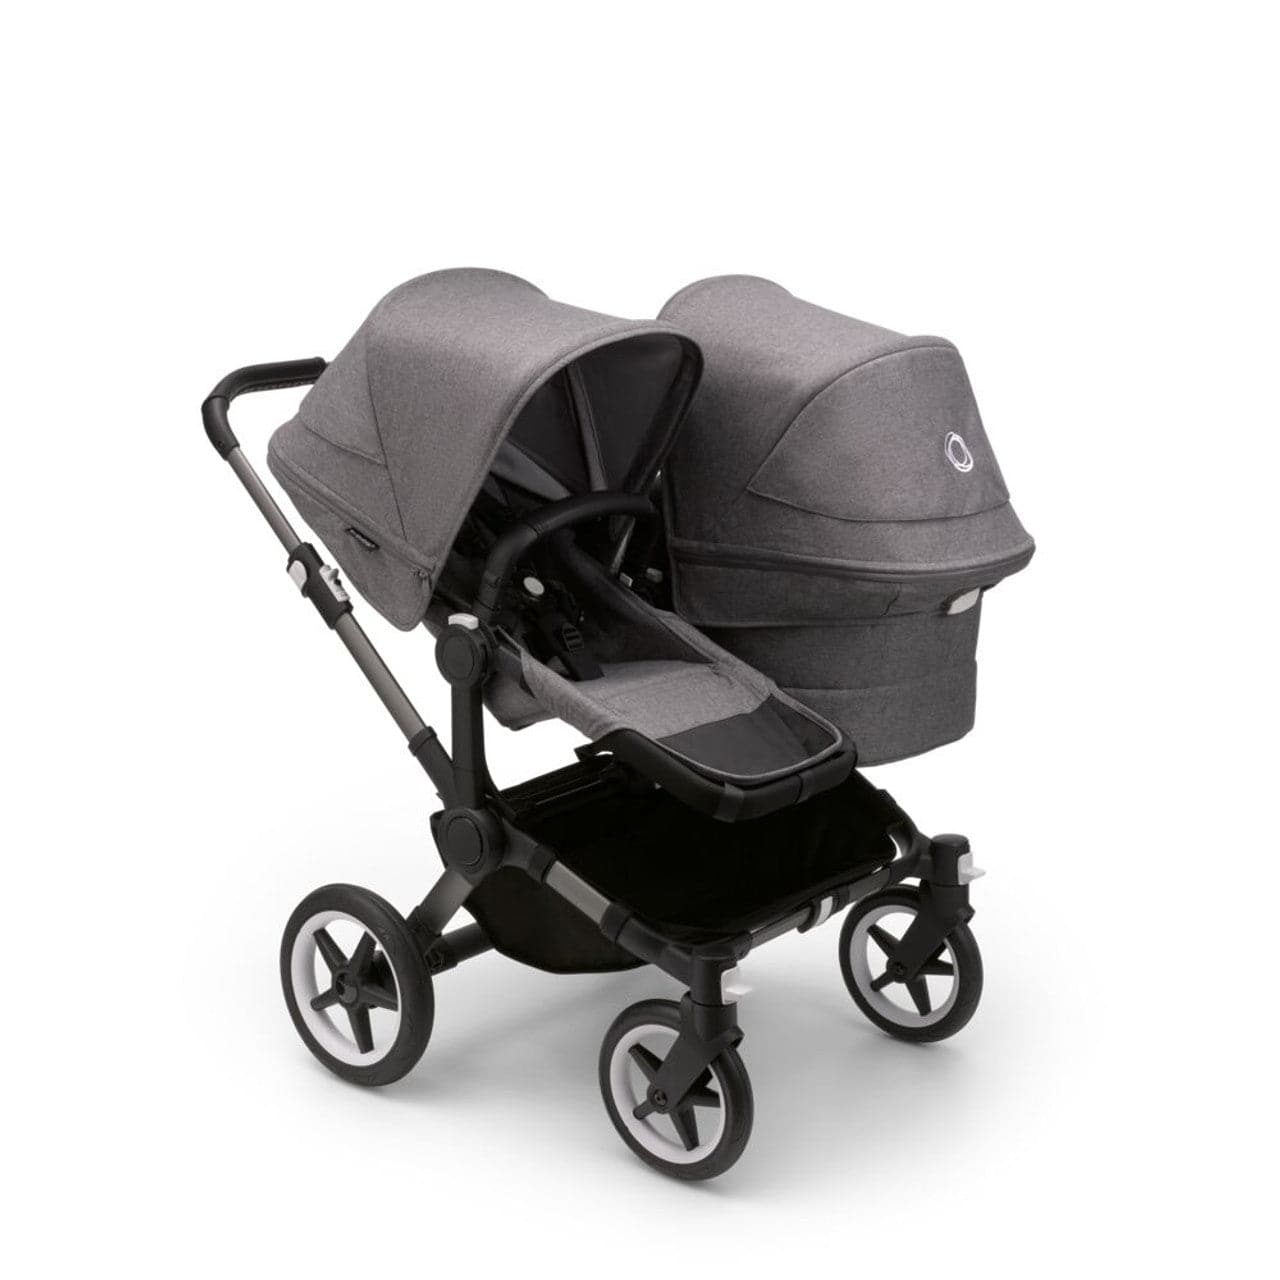 Bugaboo Donkey 5 Twin Complete Pushchair - Graphite/Grey Melange - For Your Little One